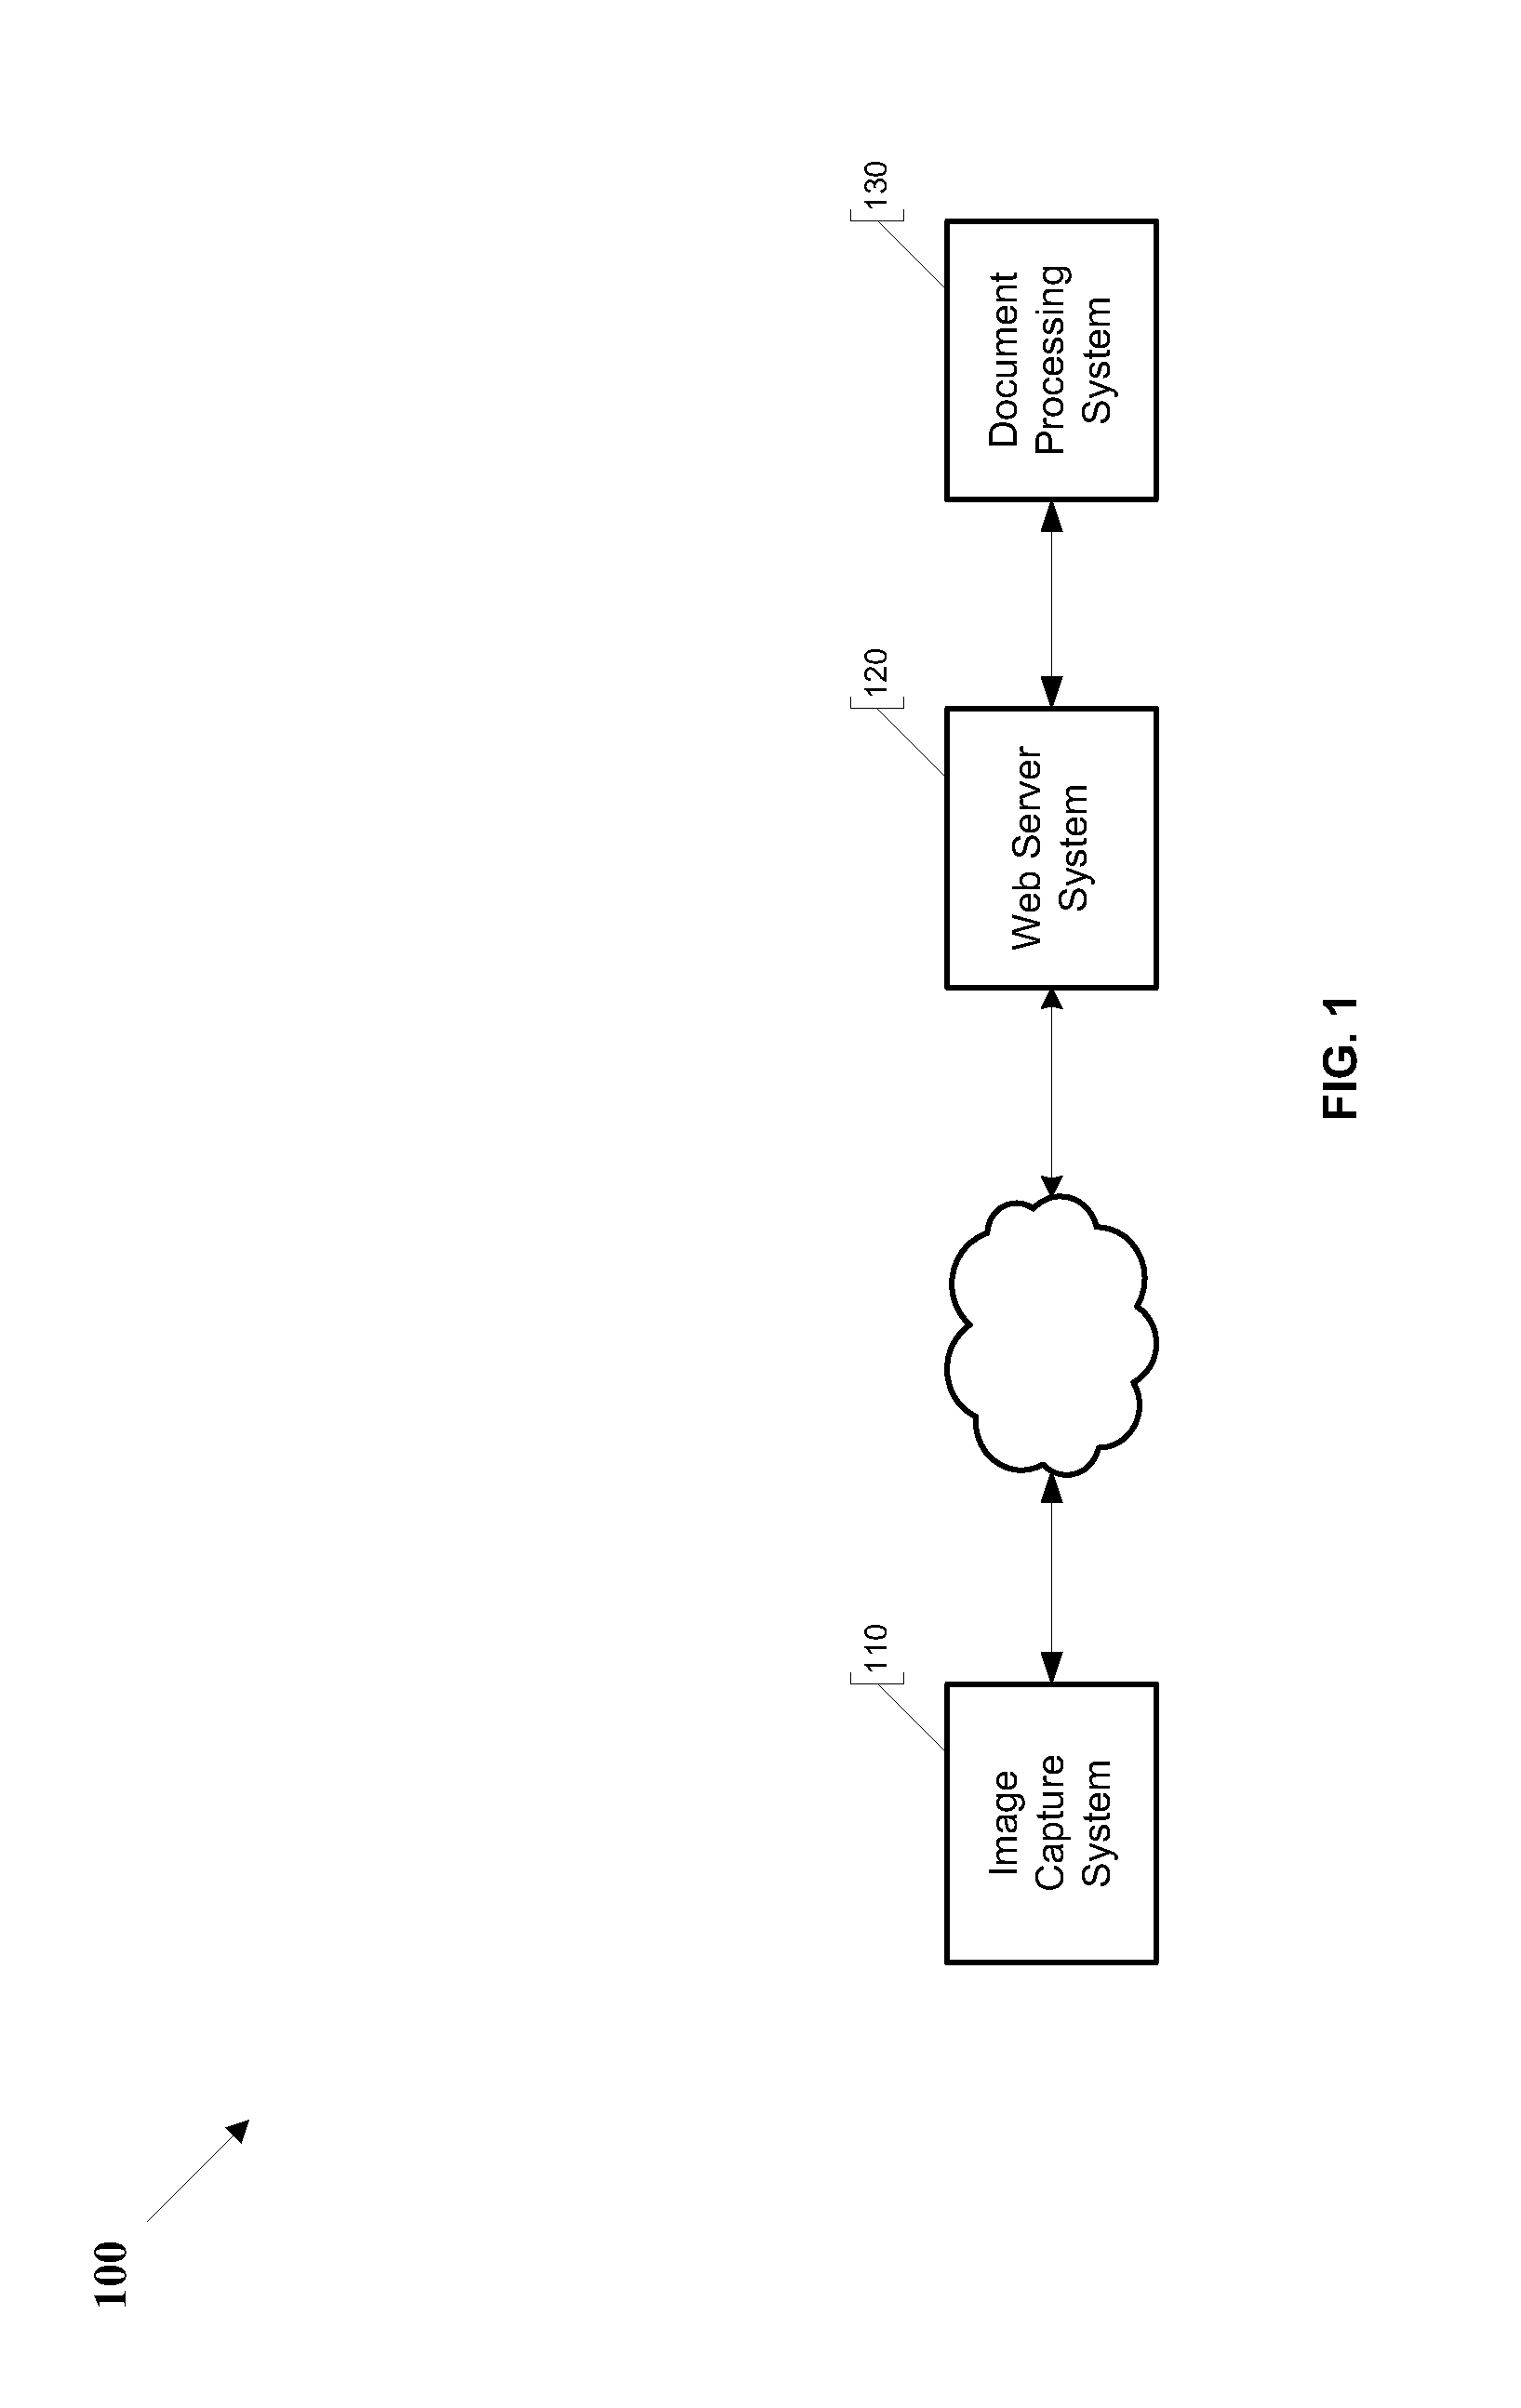 Systems and methods for automatically extracting data from eletronic documents using multiple character recognition engines